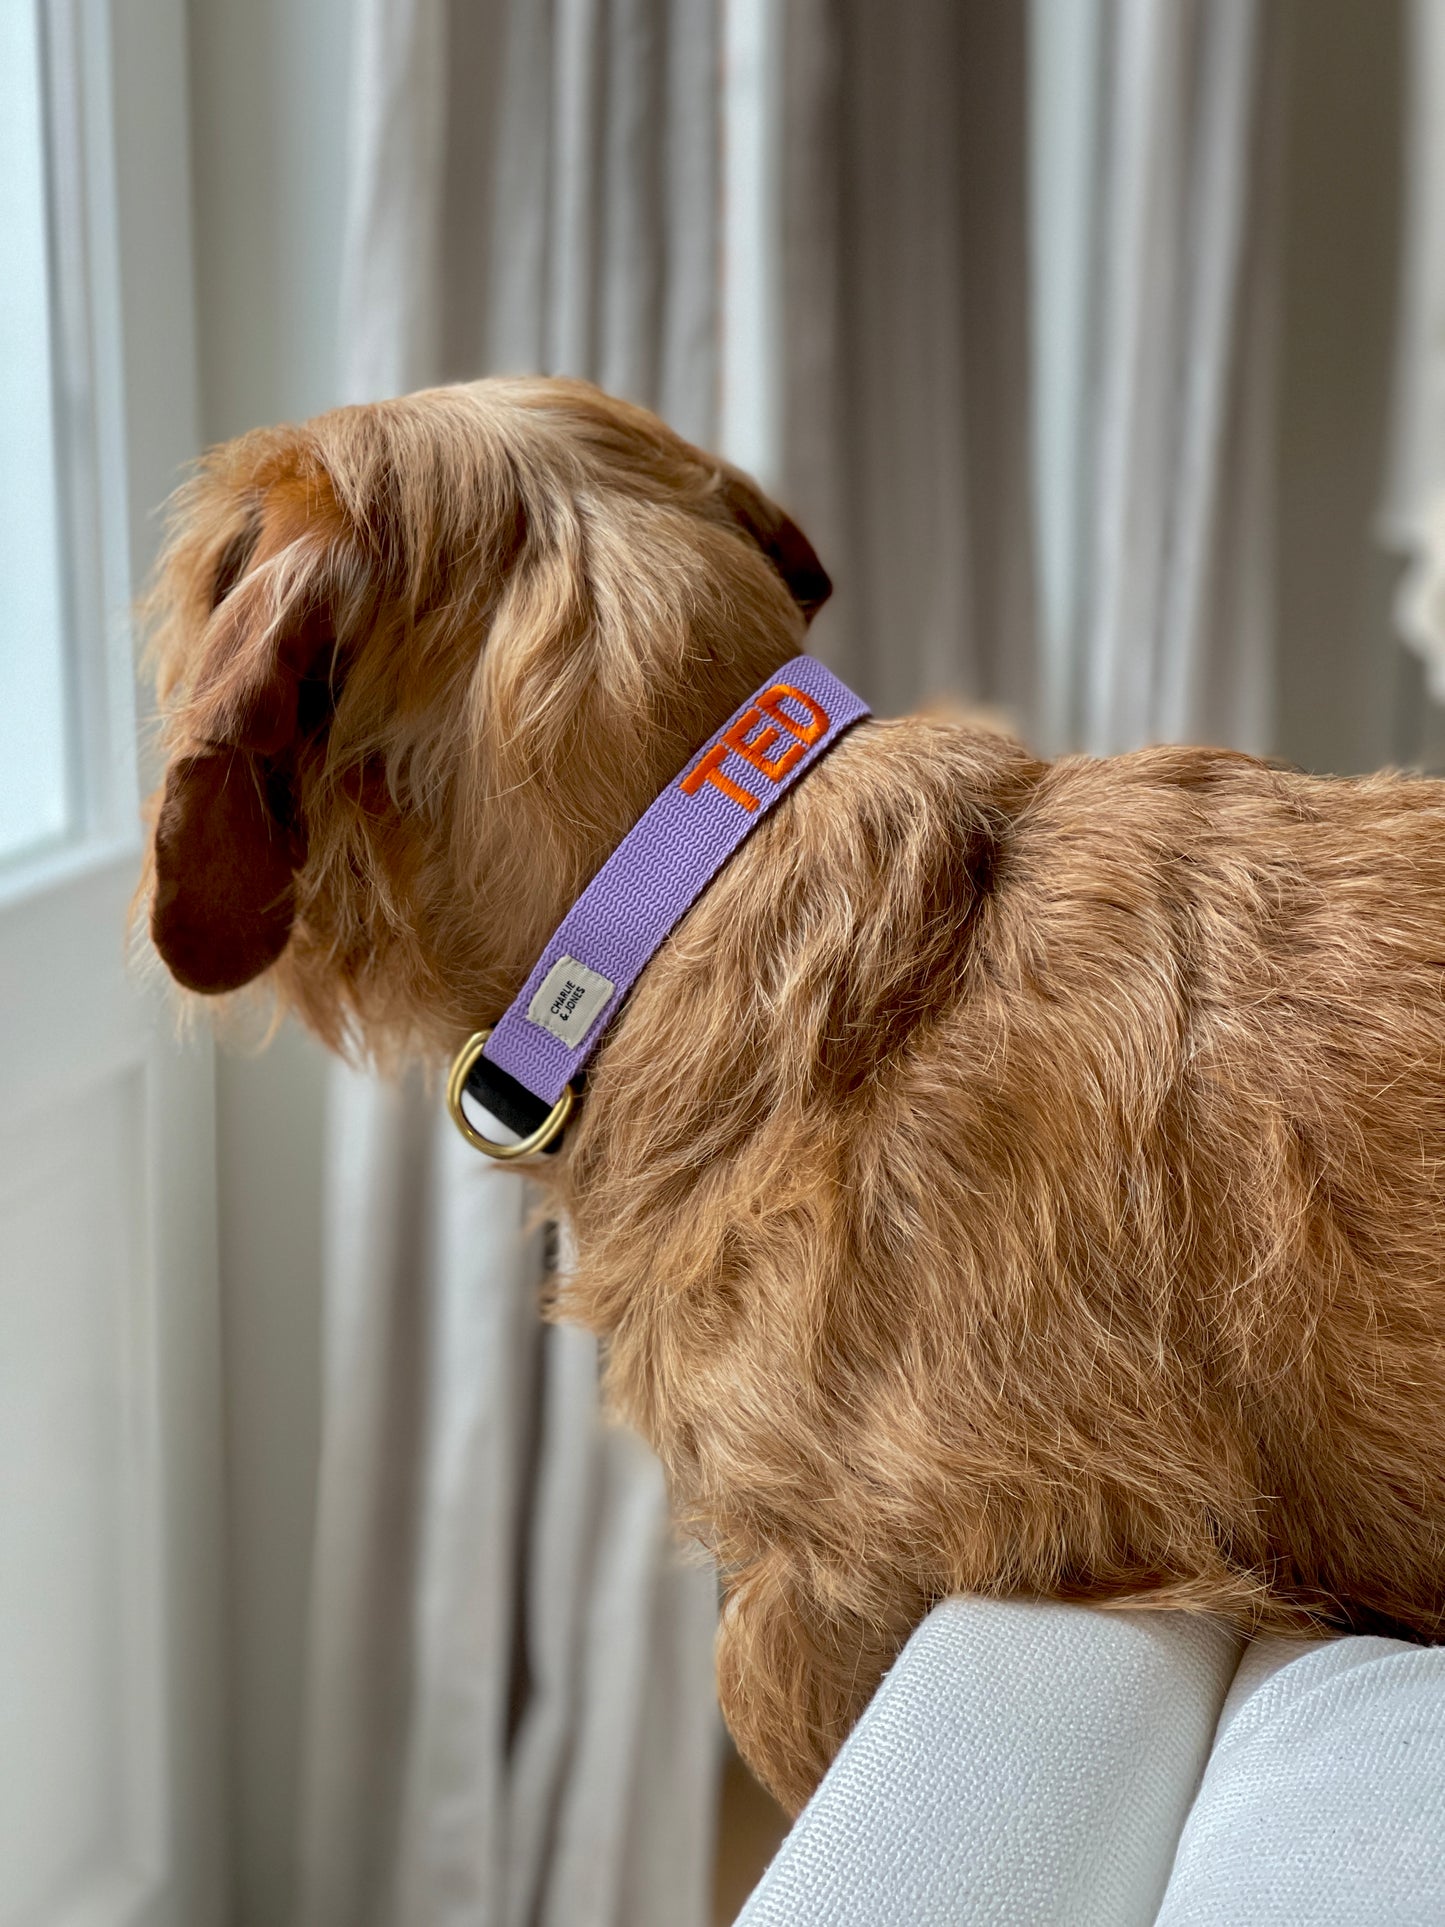 Puppy collar with name Lilac